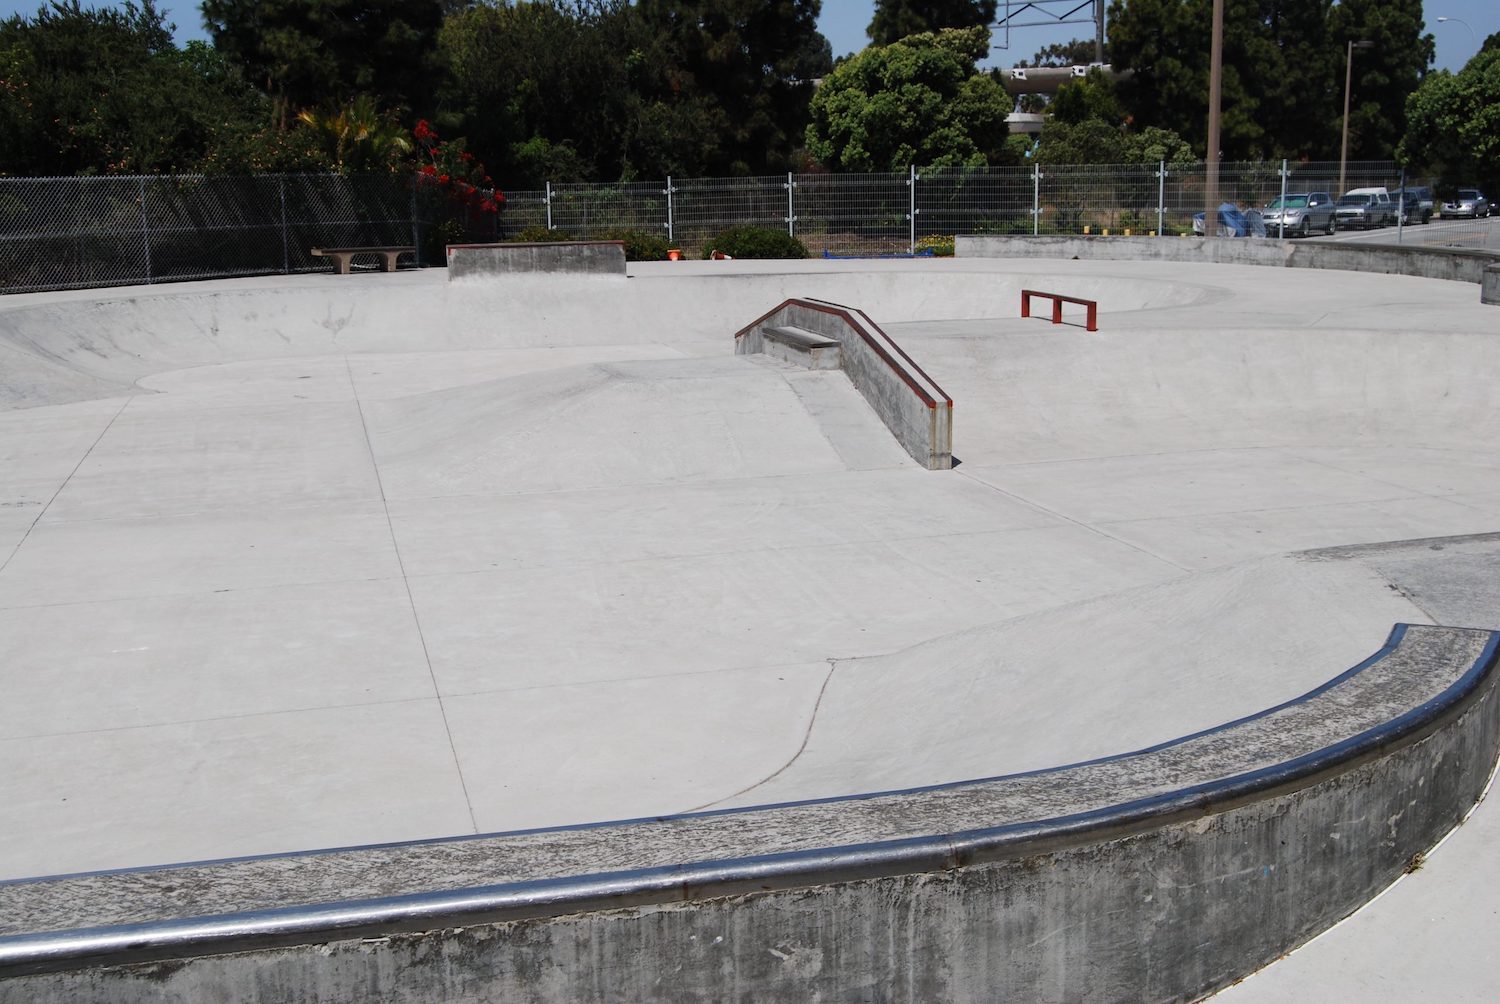 Coronado Skate Park in San Diego featuring a hubba, rail, and quarter pipe to skate in 